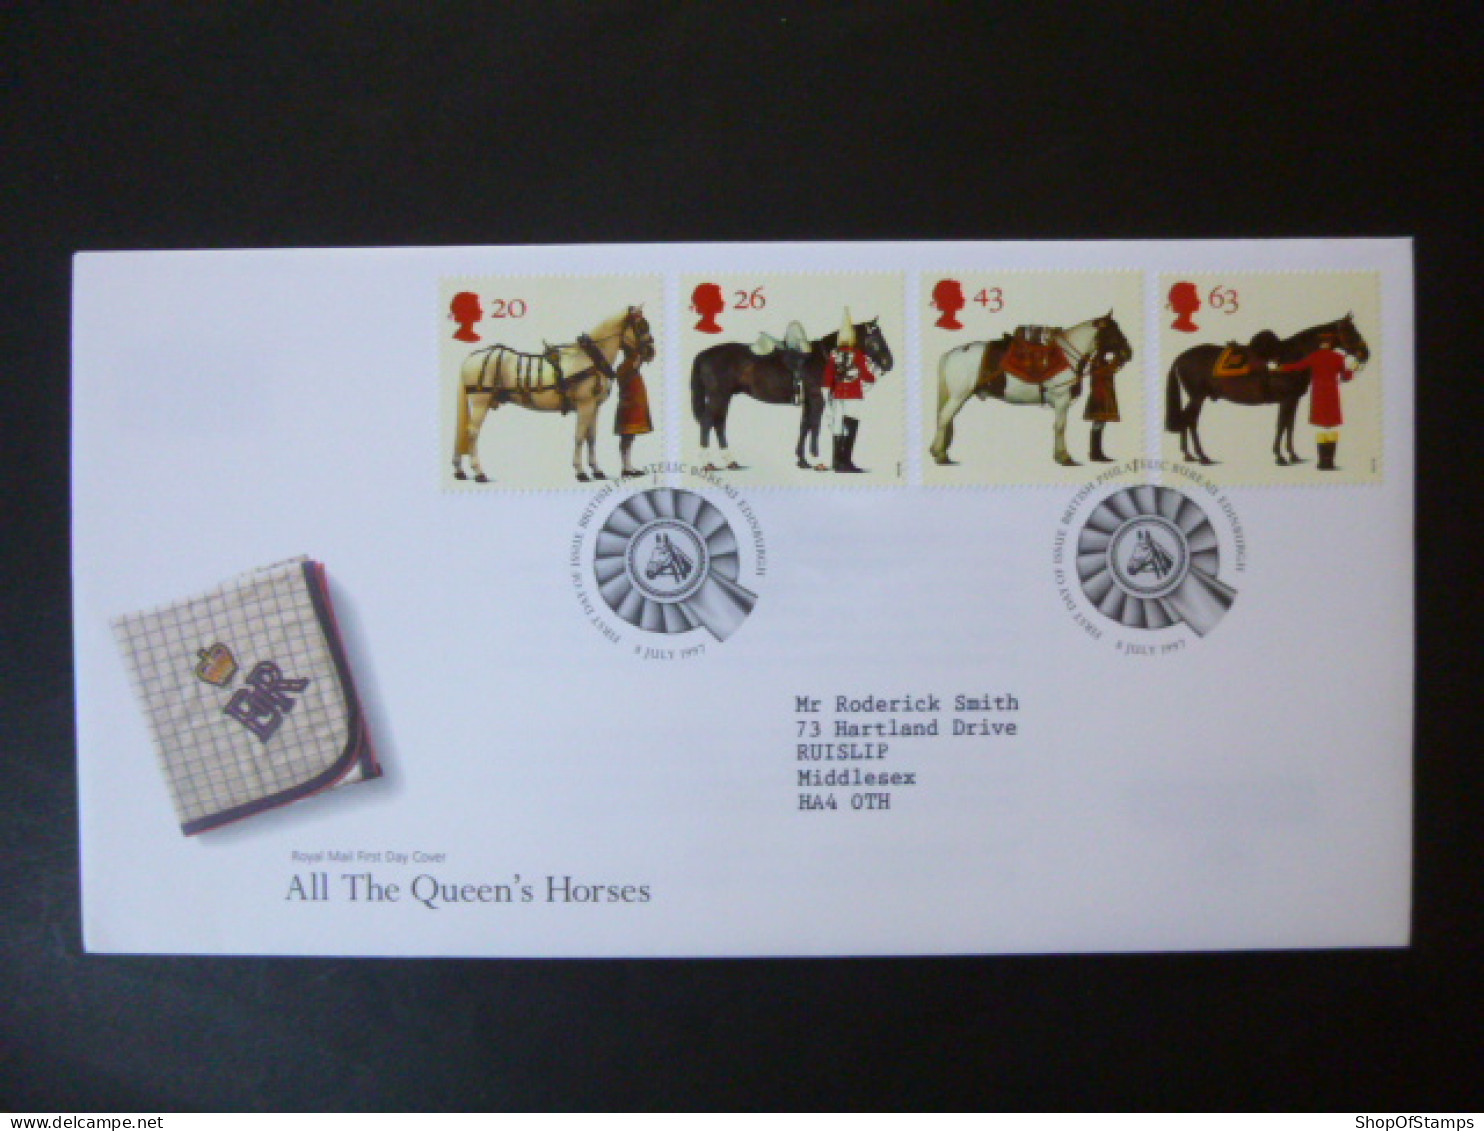 GREAT BRITAIN SG 1989-92 ALL THE QUEENS HORSES FDC EDINBURGH - Unclassified